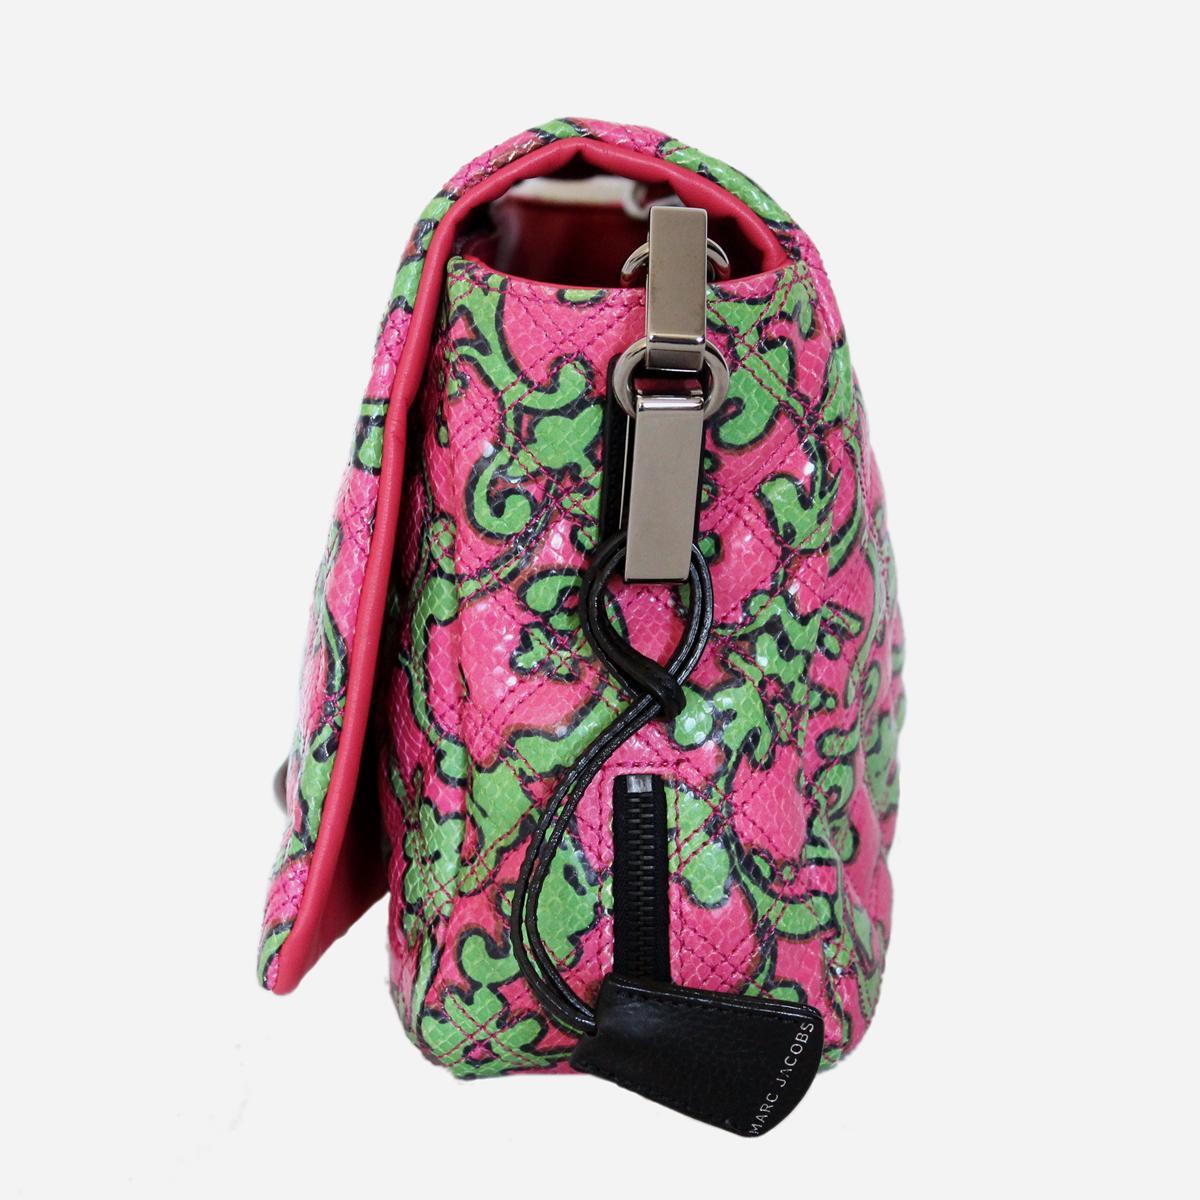 As new, super cool Marc Jacobs bag
Leather 
Python print
Electric pink
Green floral pattern
Metal chain
Keys and locker
Button closure
Bottom zip for enlargments
Internal pocket (with zip)
Cm 30 x 22 x 10  (11.8 x 8.6 x 3.9 inches)
Worldwide express